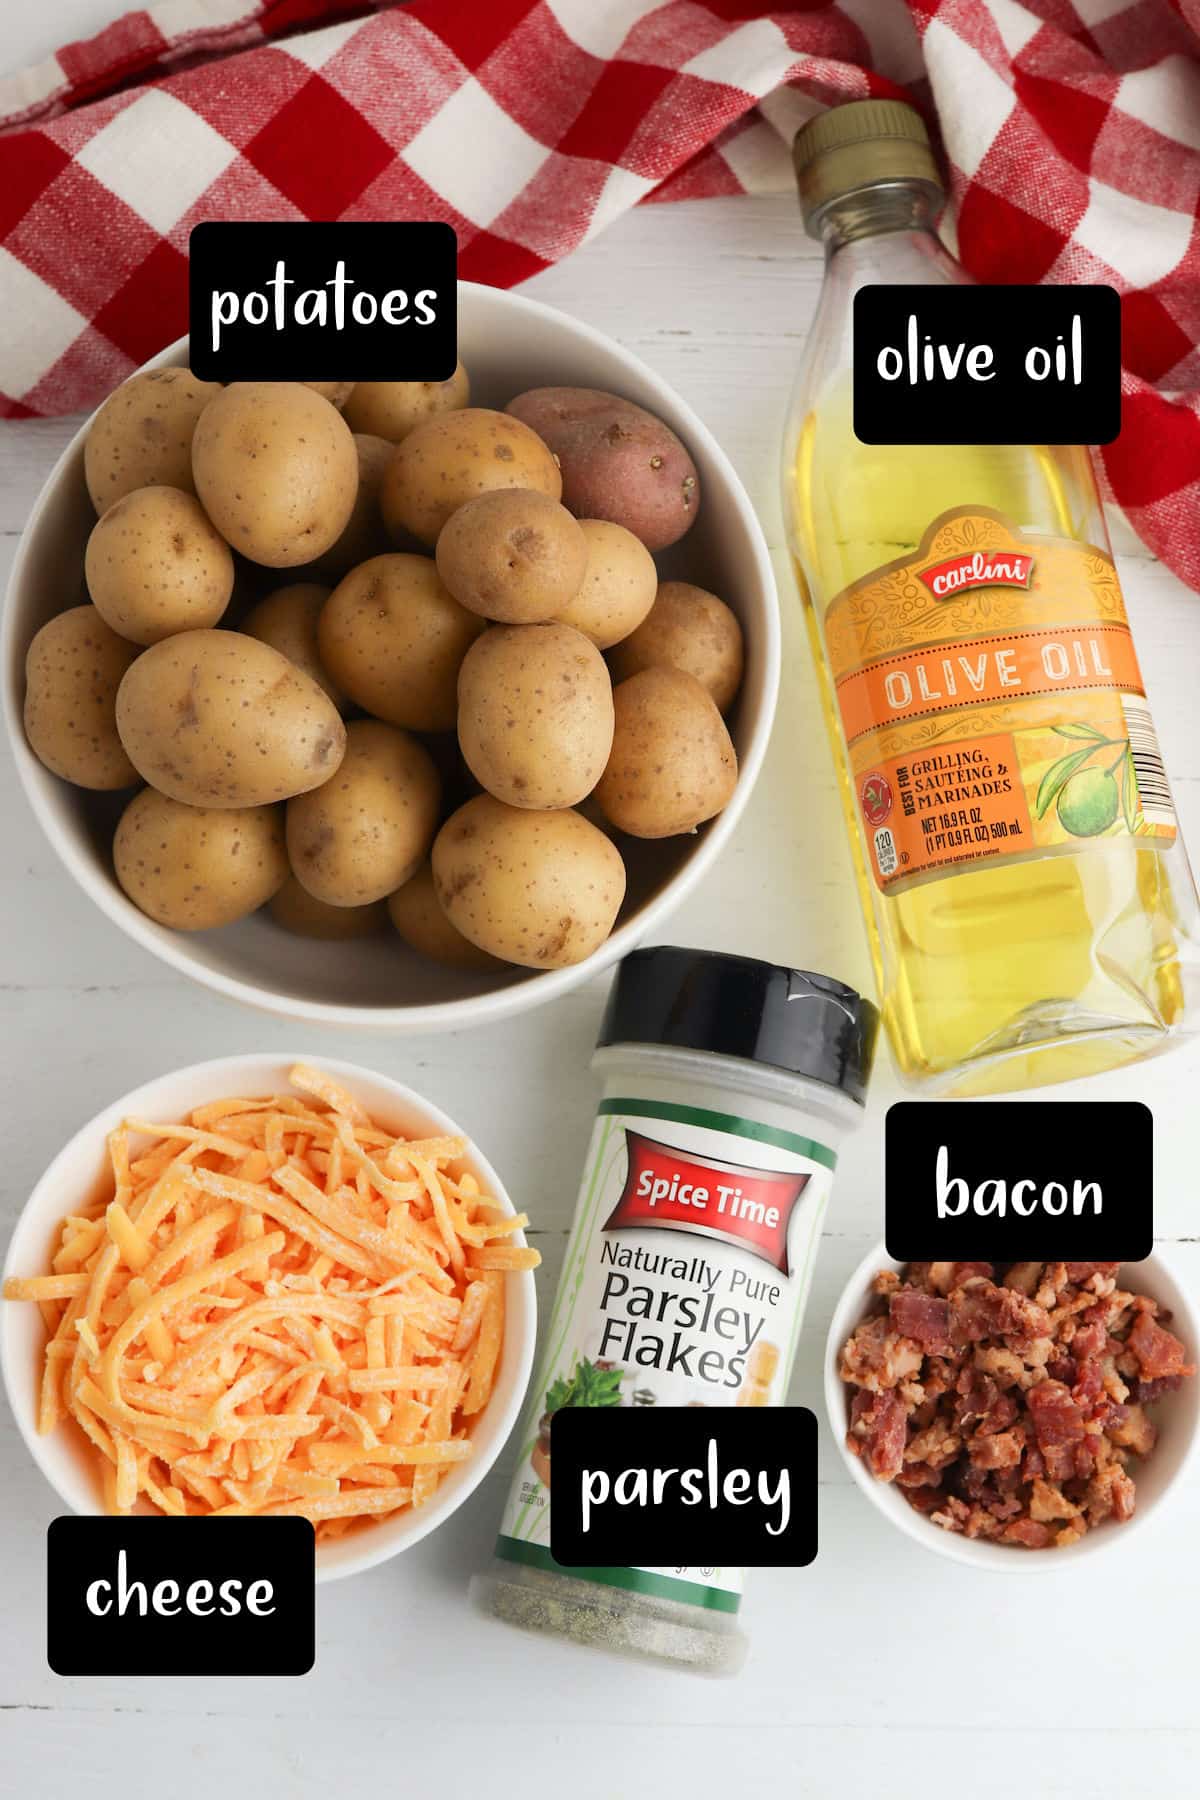 Ingredients for country potatoes.